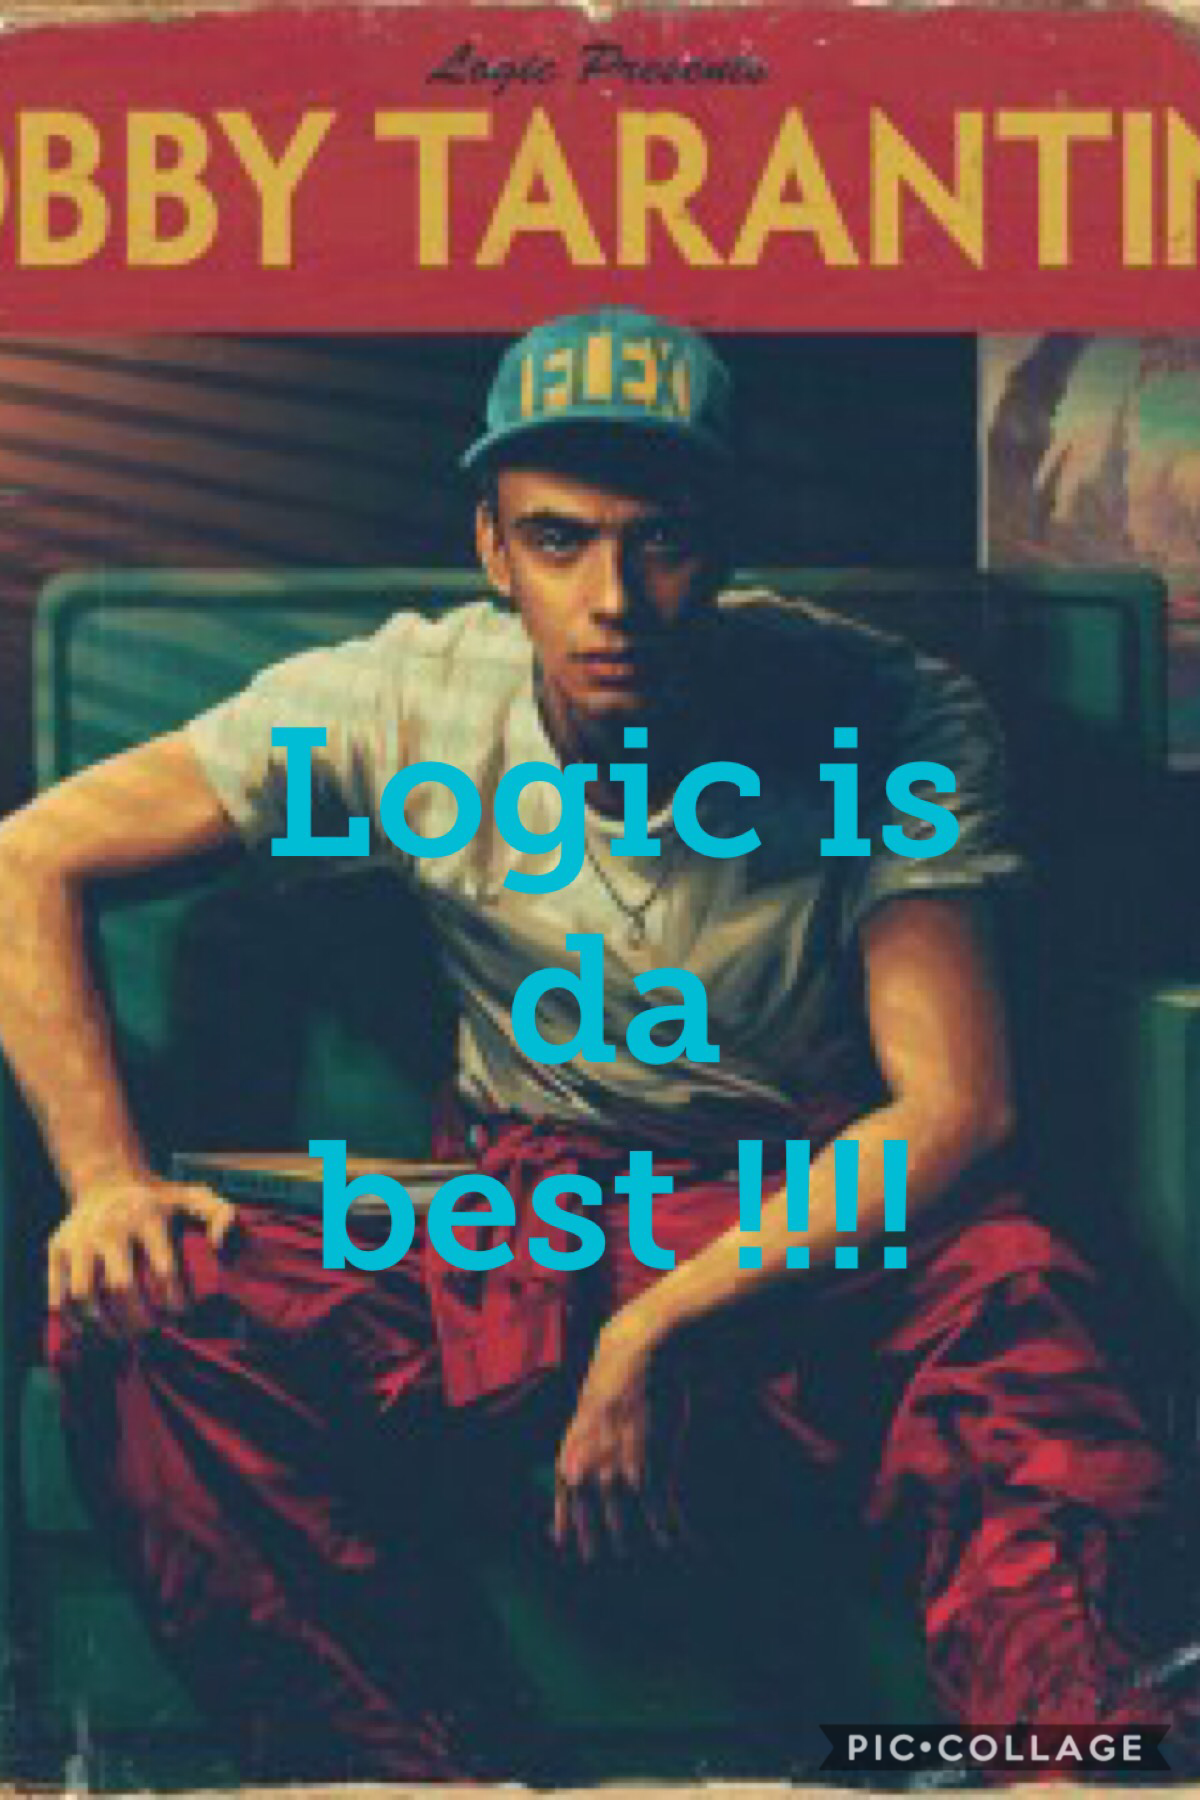 Logic is one of my favorite rappers 